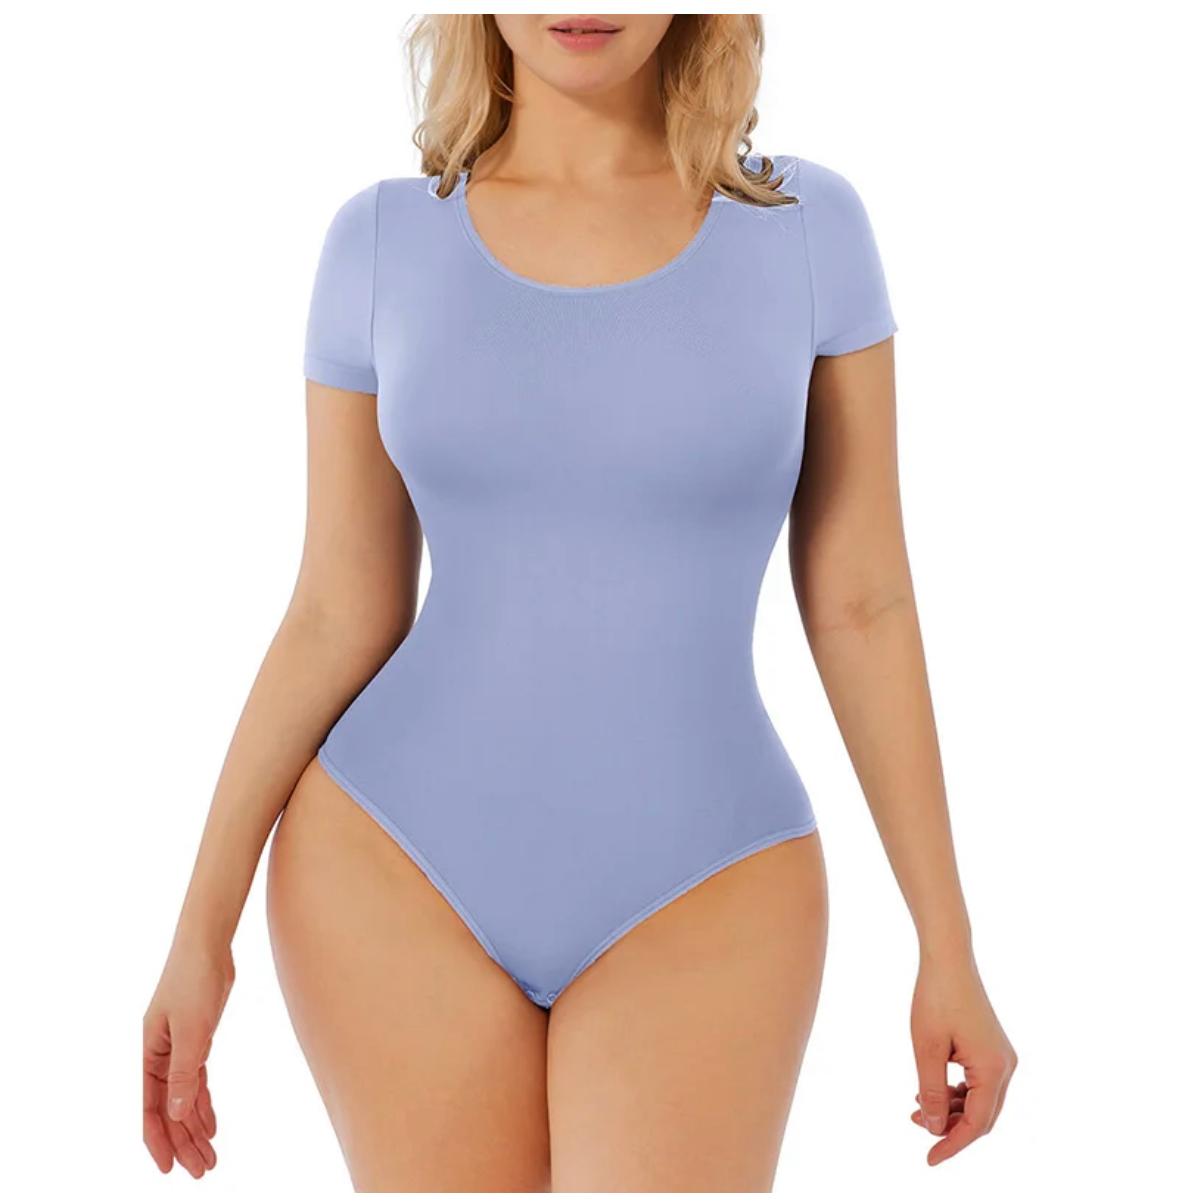 Womens Tummy Control Bodysuit With BuLifter Panties Slimming Body Shaper  And Racerback Shapewear For A Flawless Figure From Hollywany, $16.7